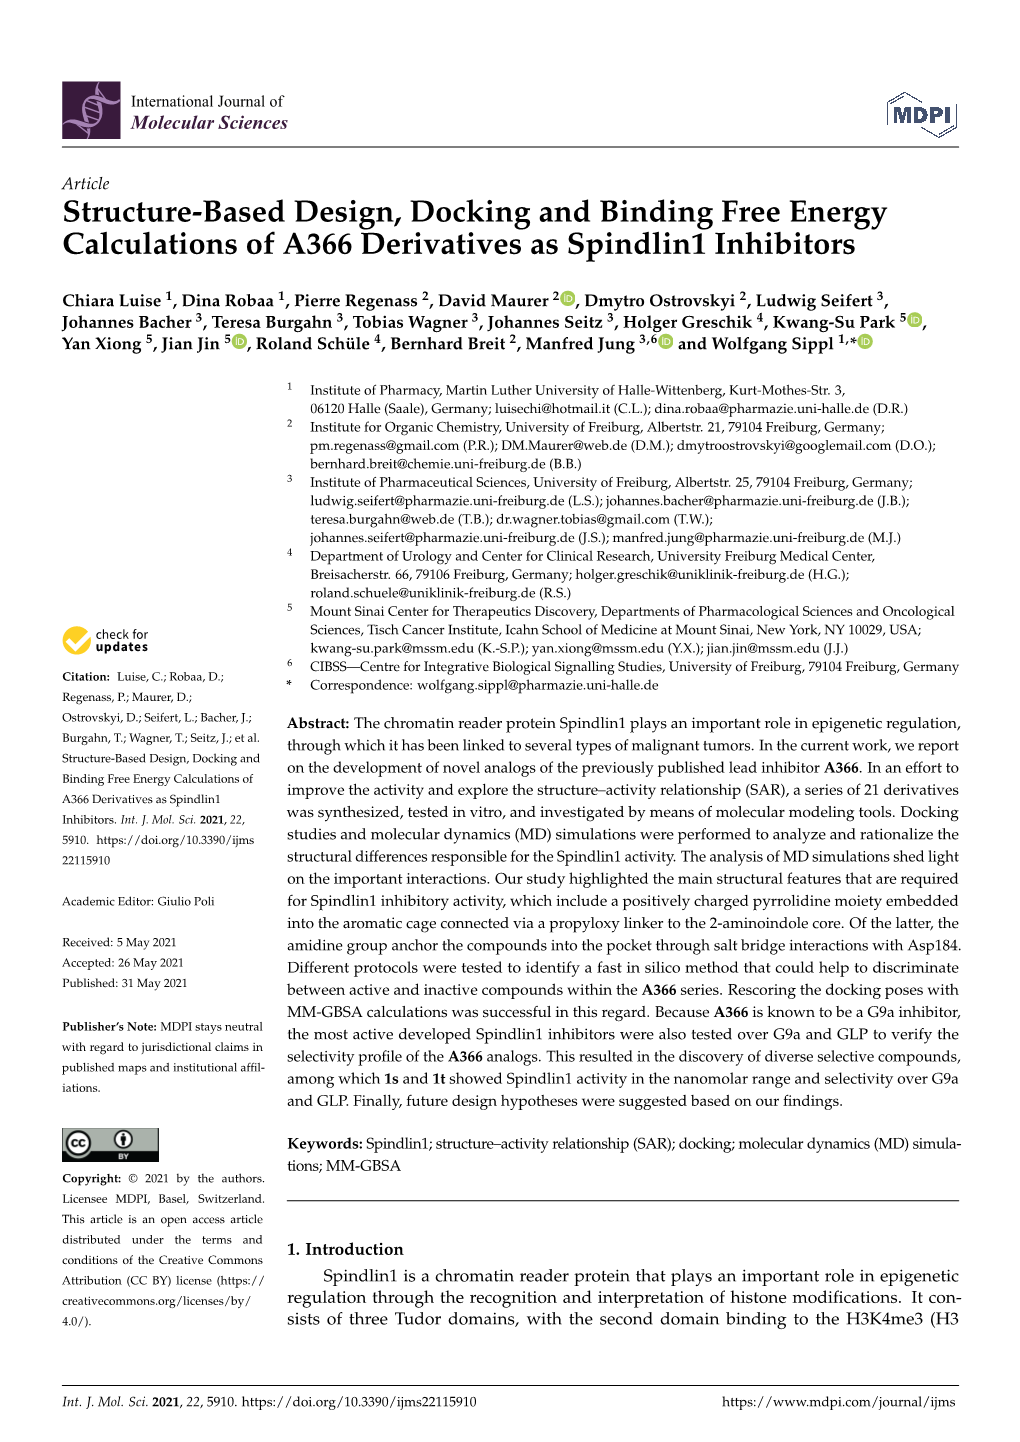 Structure-Based Design, Docking and Binding Free Energy Calculations of A366 Derivatives As Spindlin1 Inhibitors